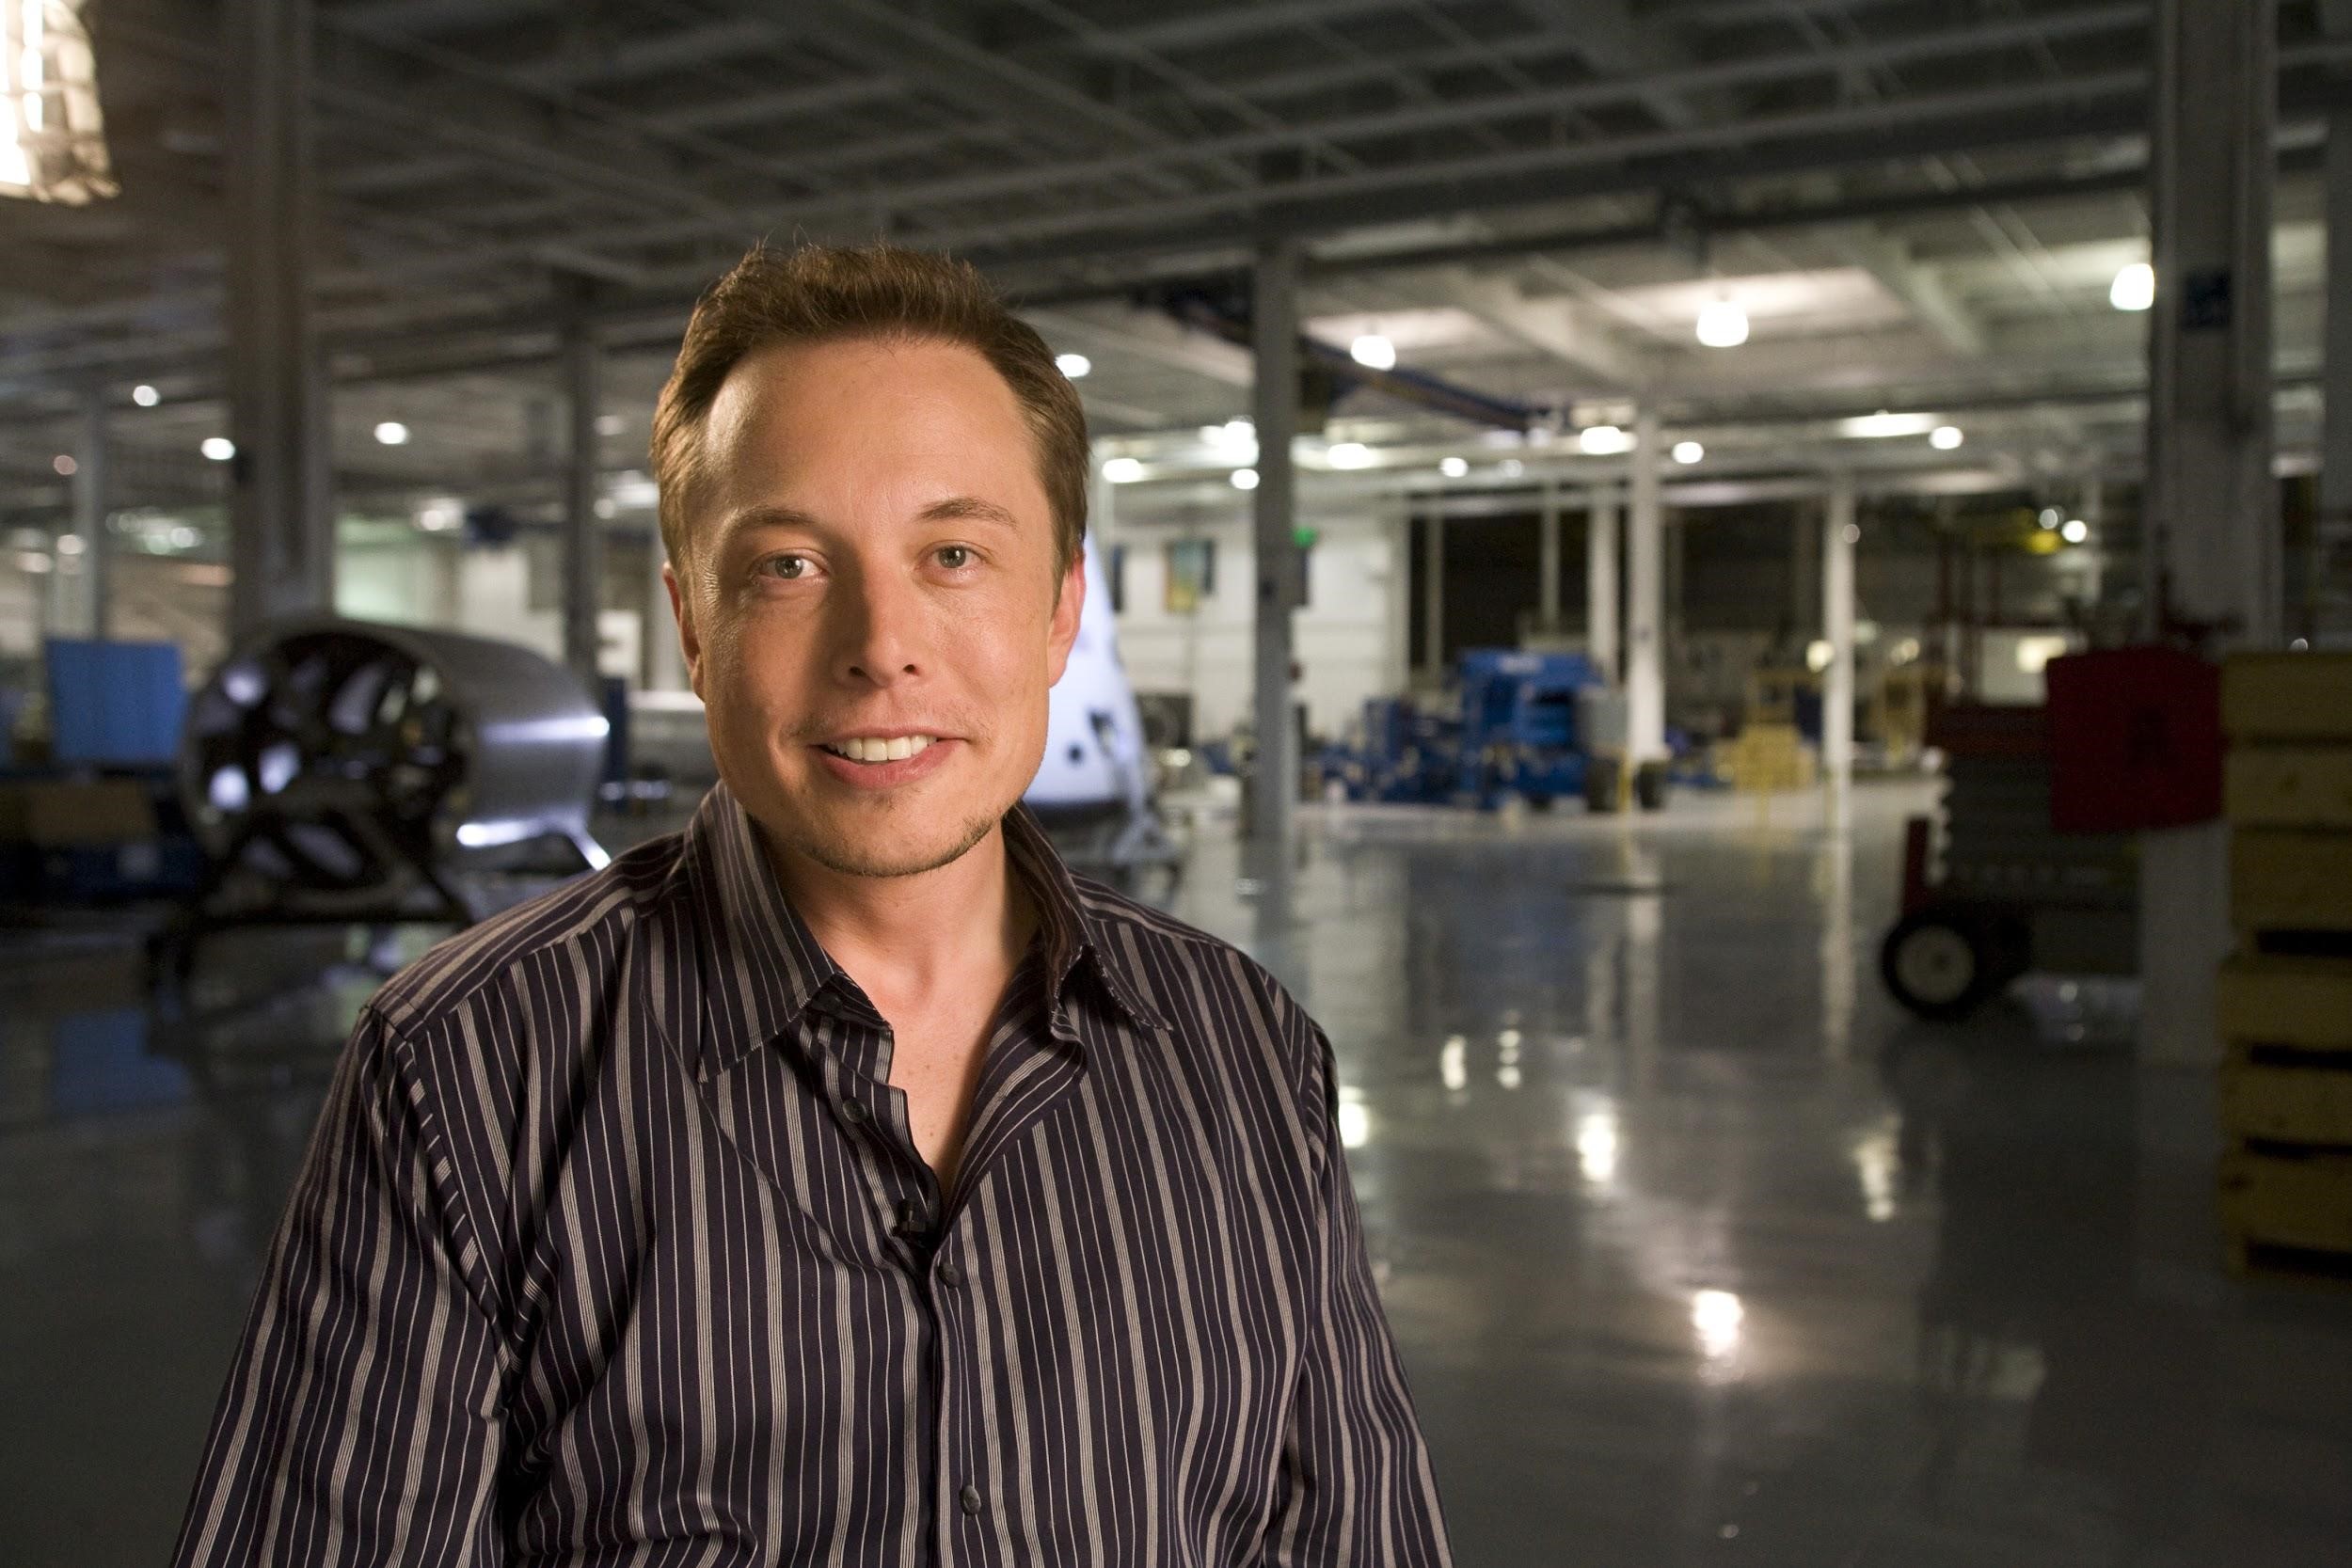 Elon Musk at SpaceX